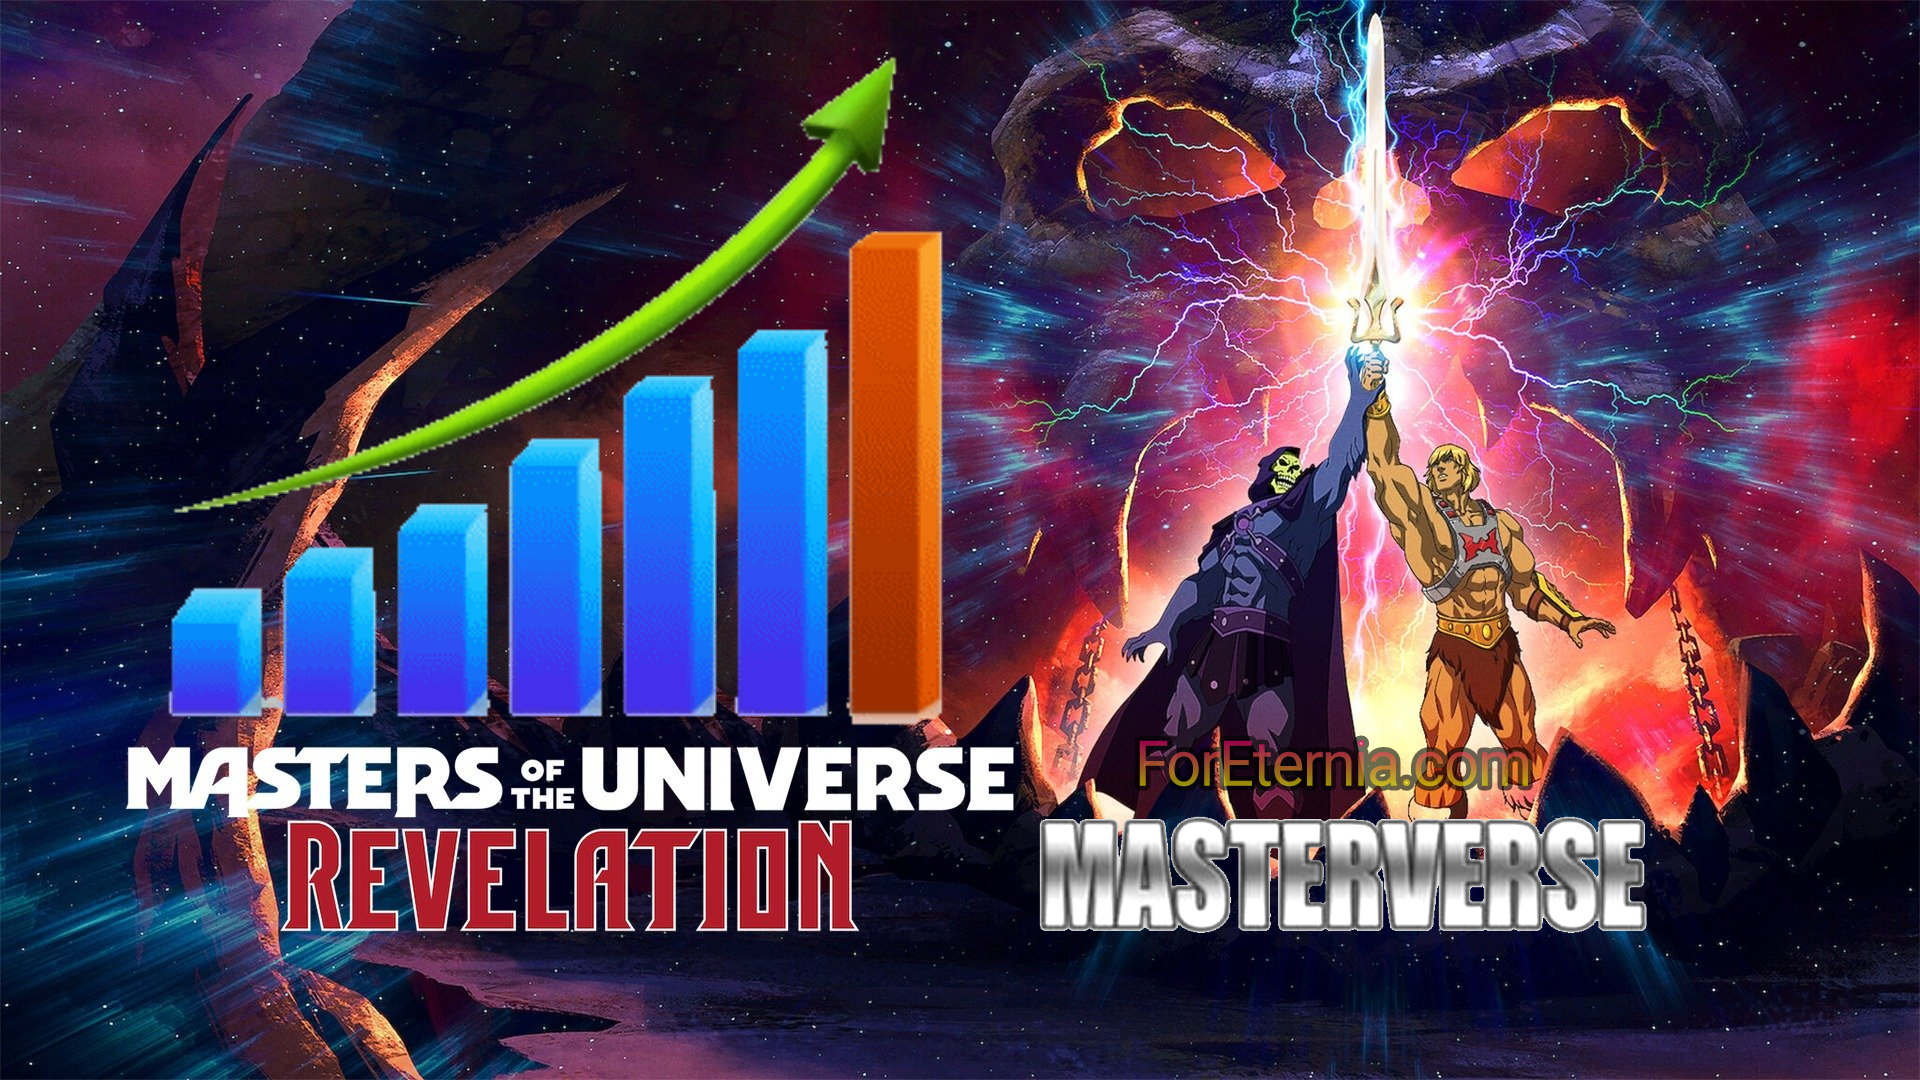 Mattel was very happy with the launch of ”Masters of the Universe: Revelation” and the ”Masterverse” toy line.